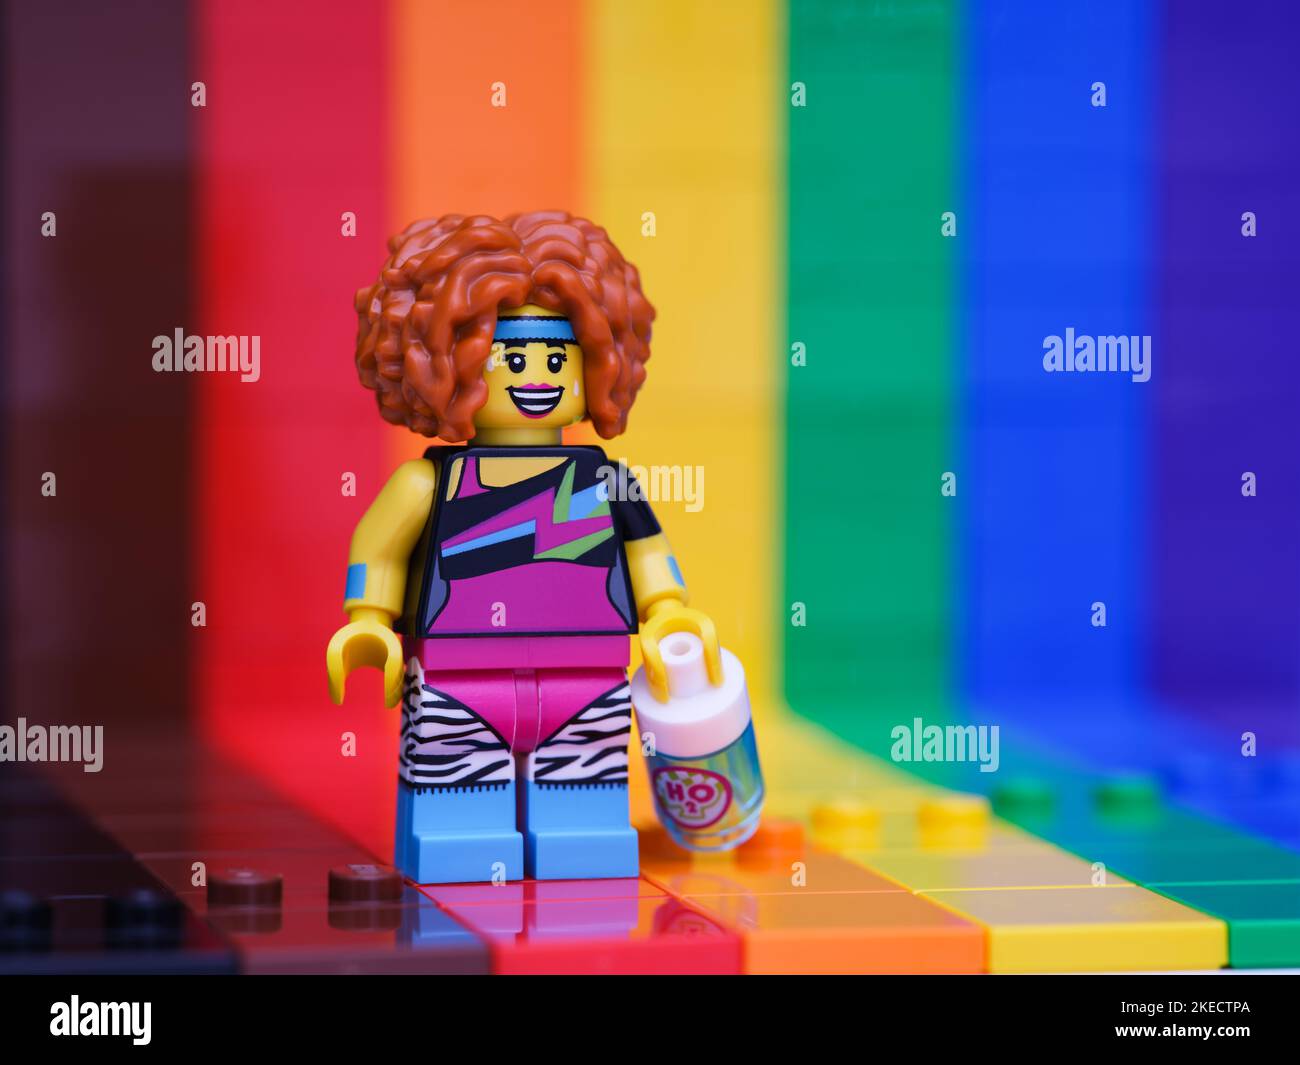 Tambov, Russian Federation - November 07, 2022 A Lego Dance Instructor minifigure with water bottle standing against a rainbow backdrop Stock Photo